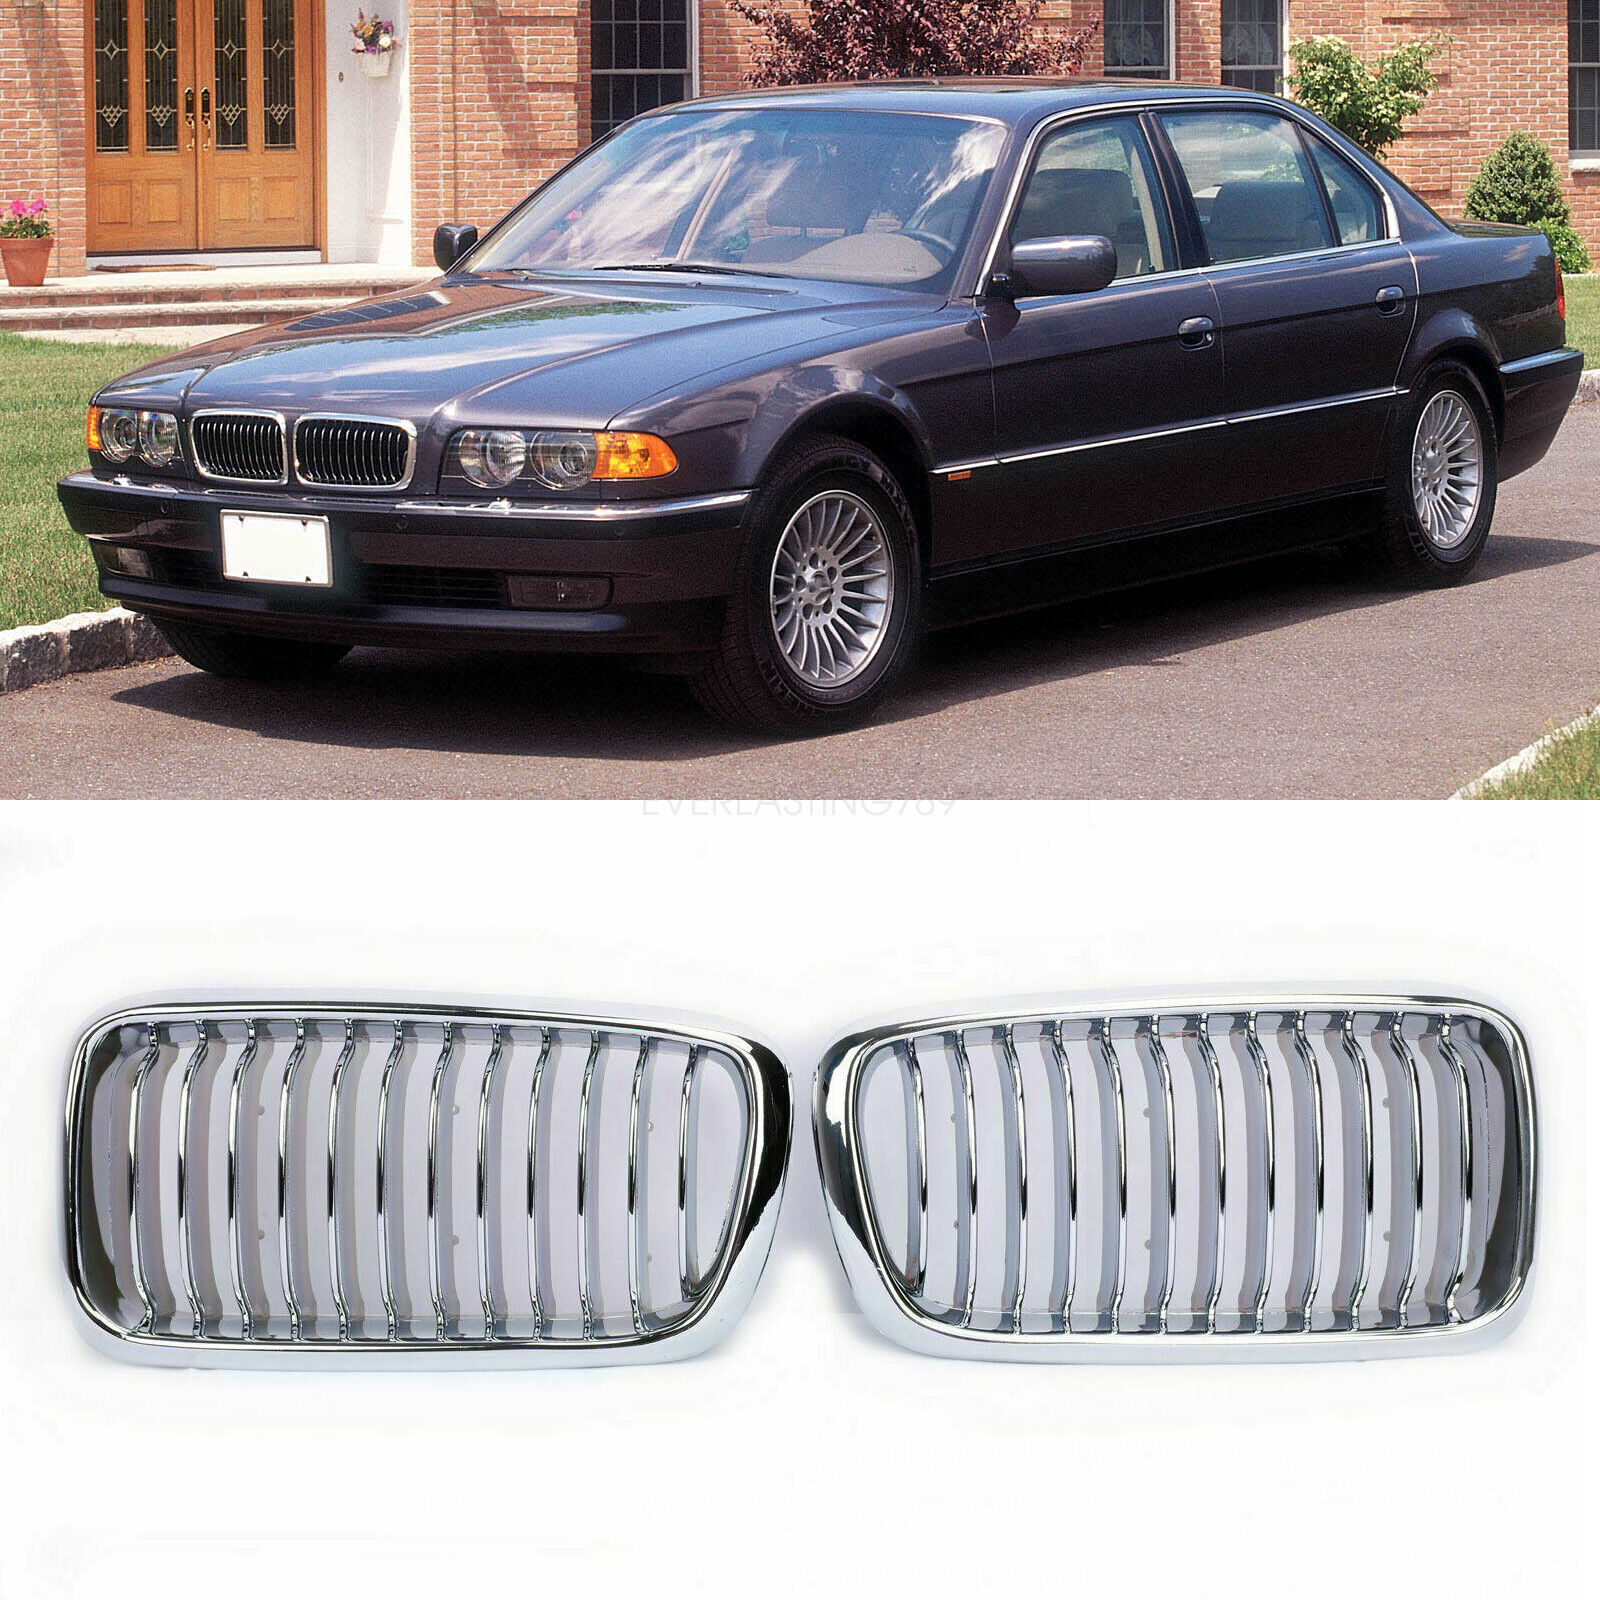 FRONT HOOD GRILL CHROME GRILLE For BMW E38 740 750 IL 99-02 631384130689 |  eBay